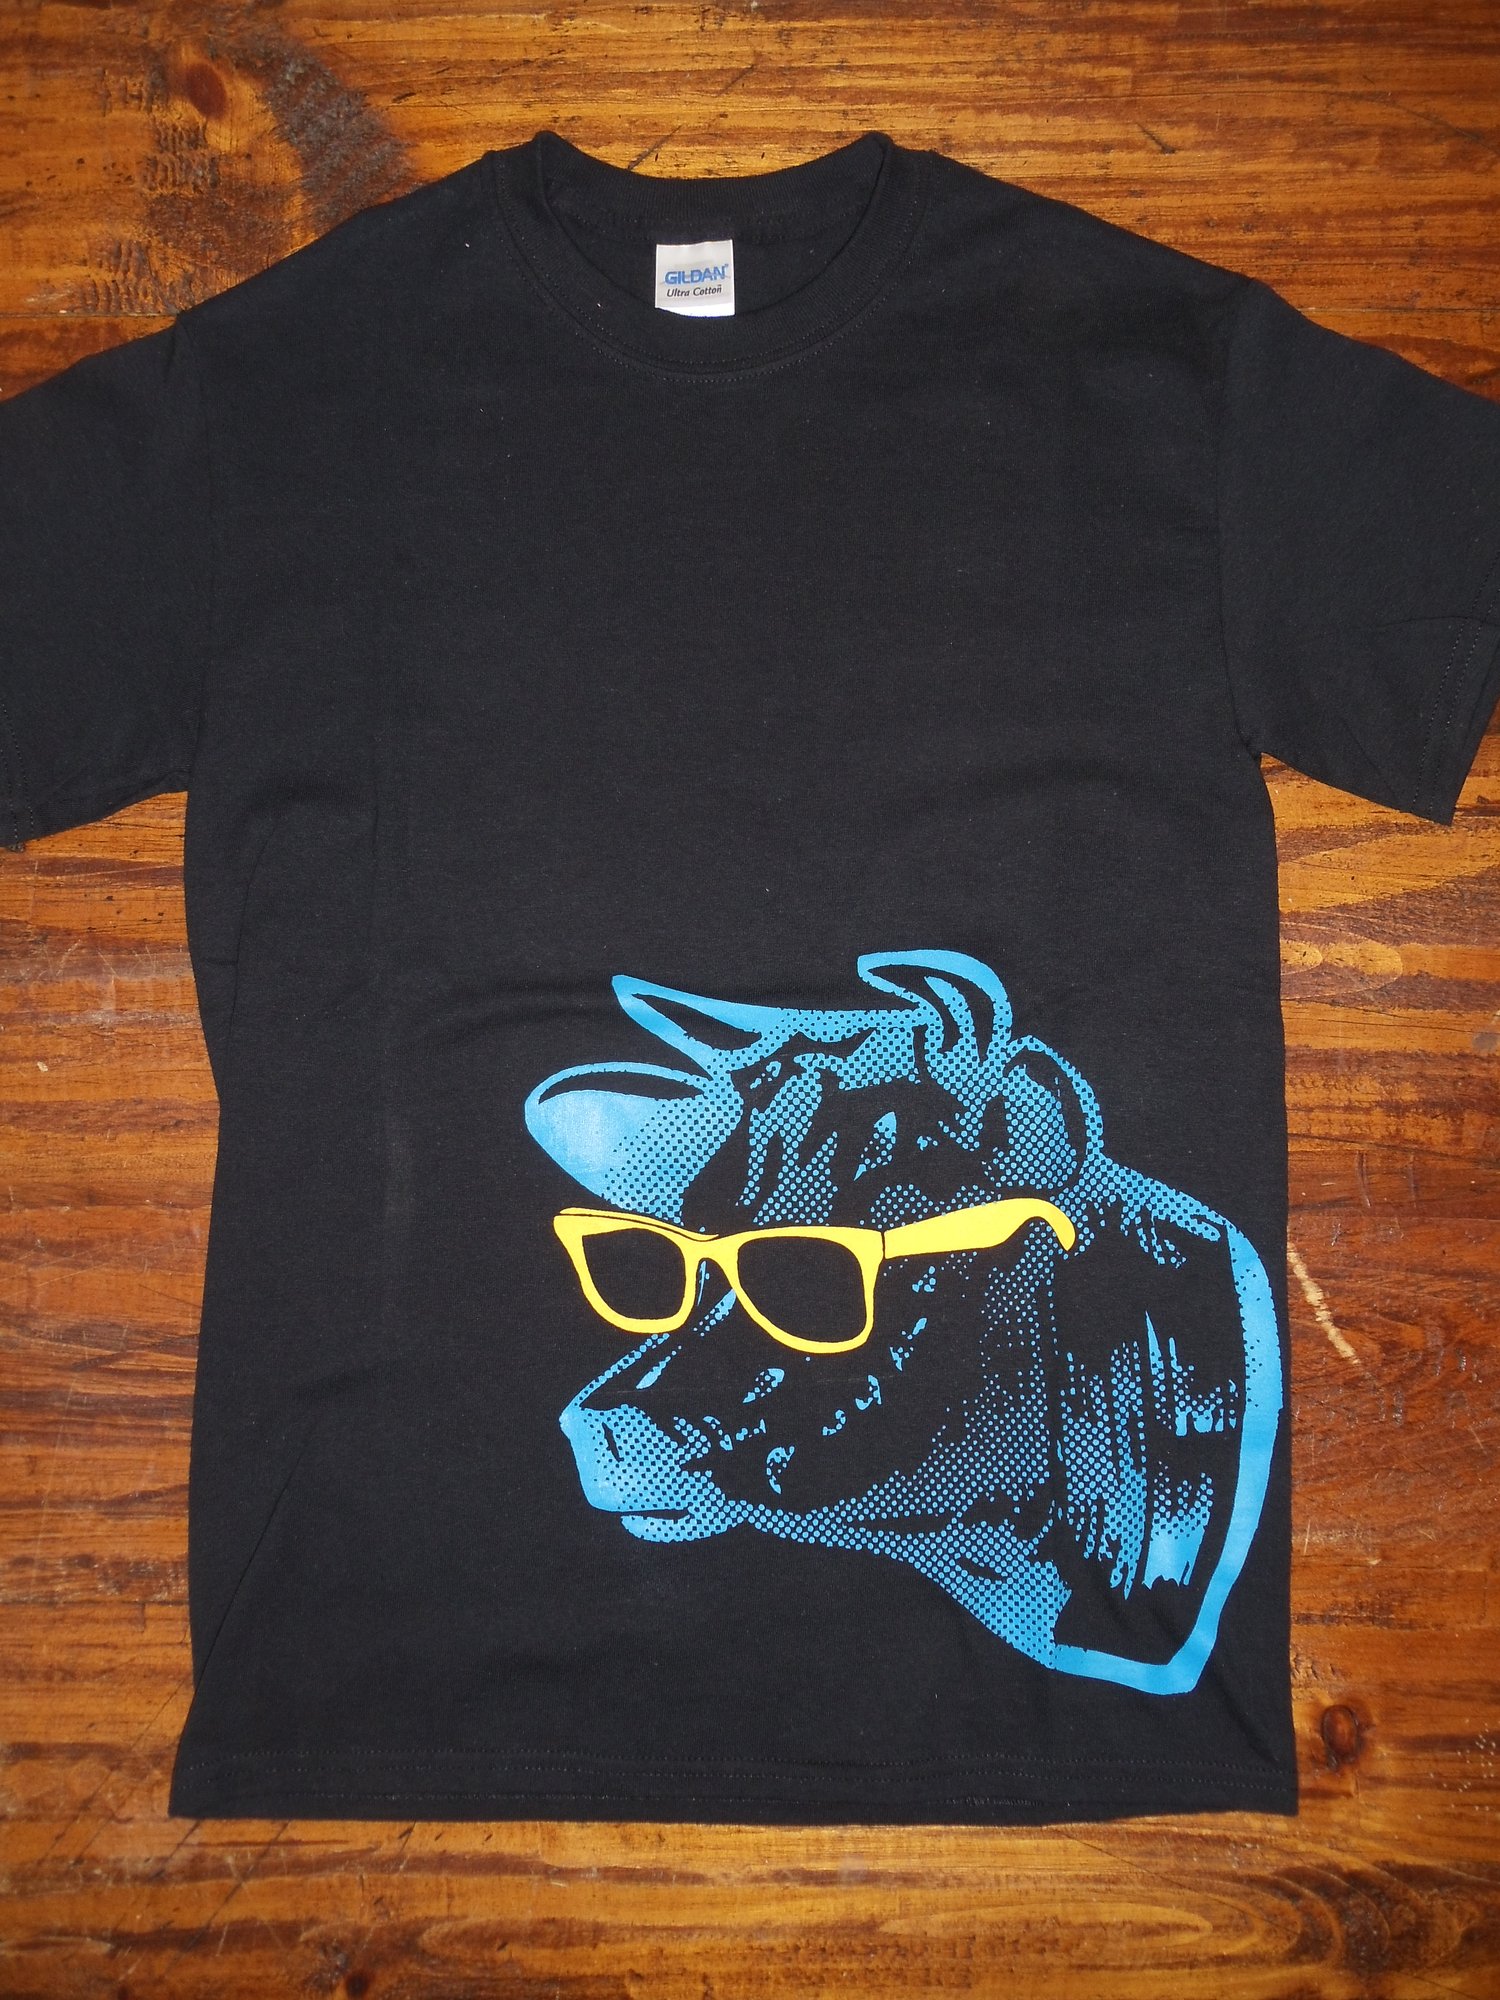 Image of 802 Steez Cow T-Shirt - Vermont Clothing - 802 Clothing Cow shirt